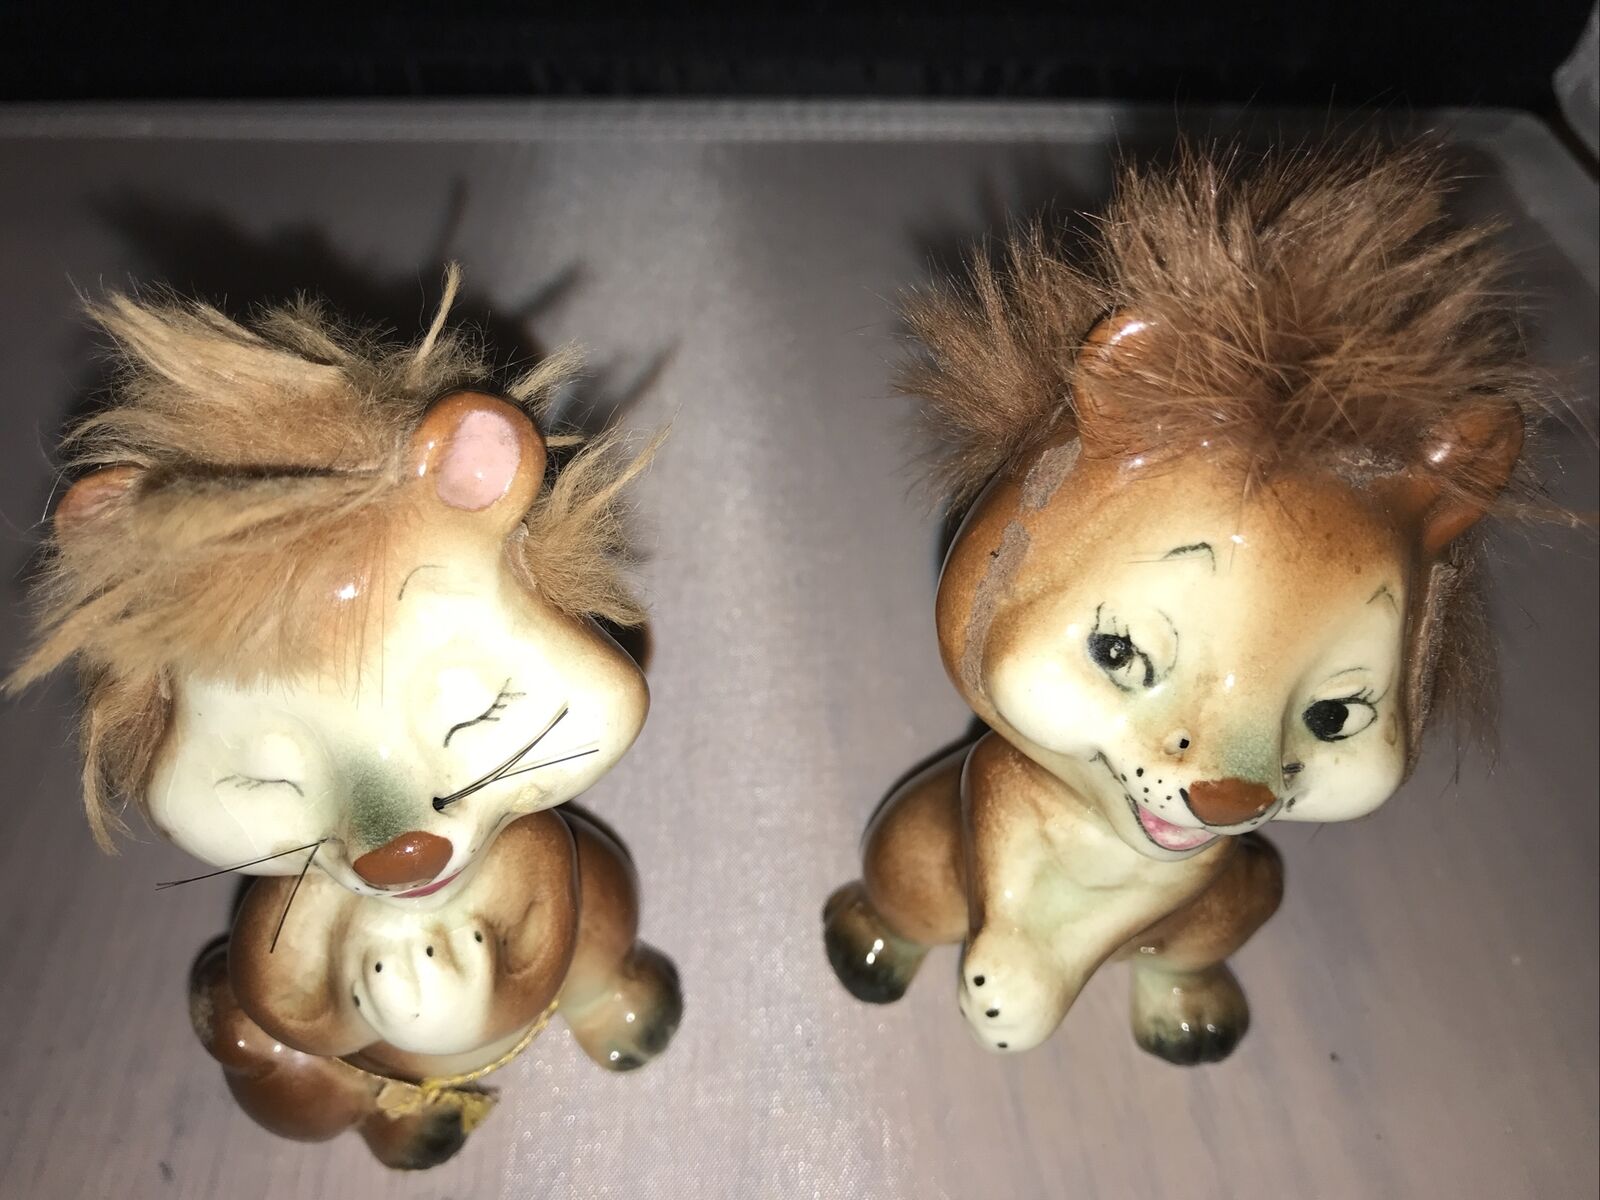 Vintage Ceramic Furry Lion Figurines From Japan Set Of Two Slightly Chipped